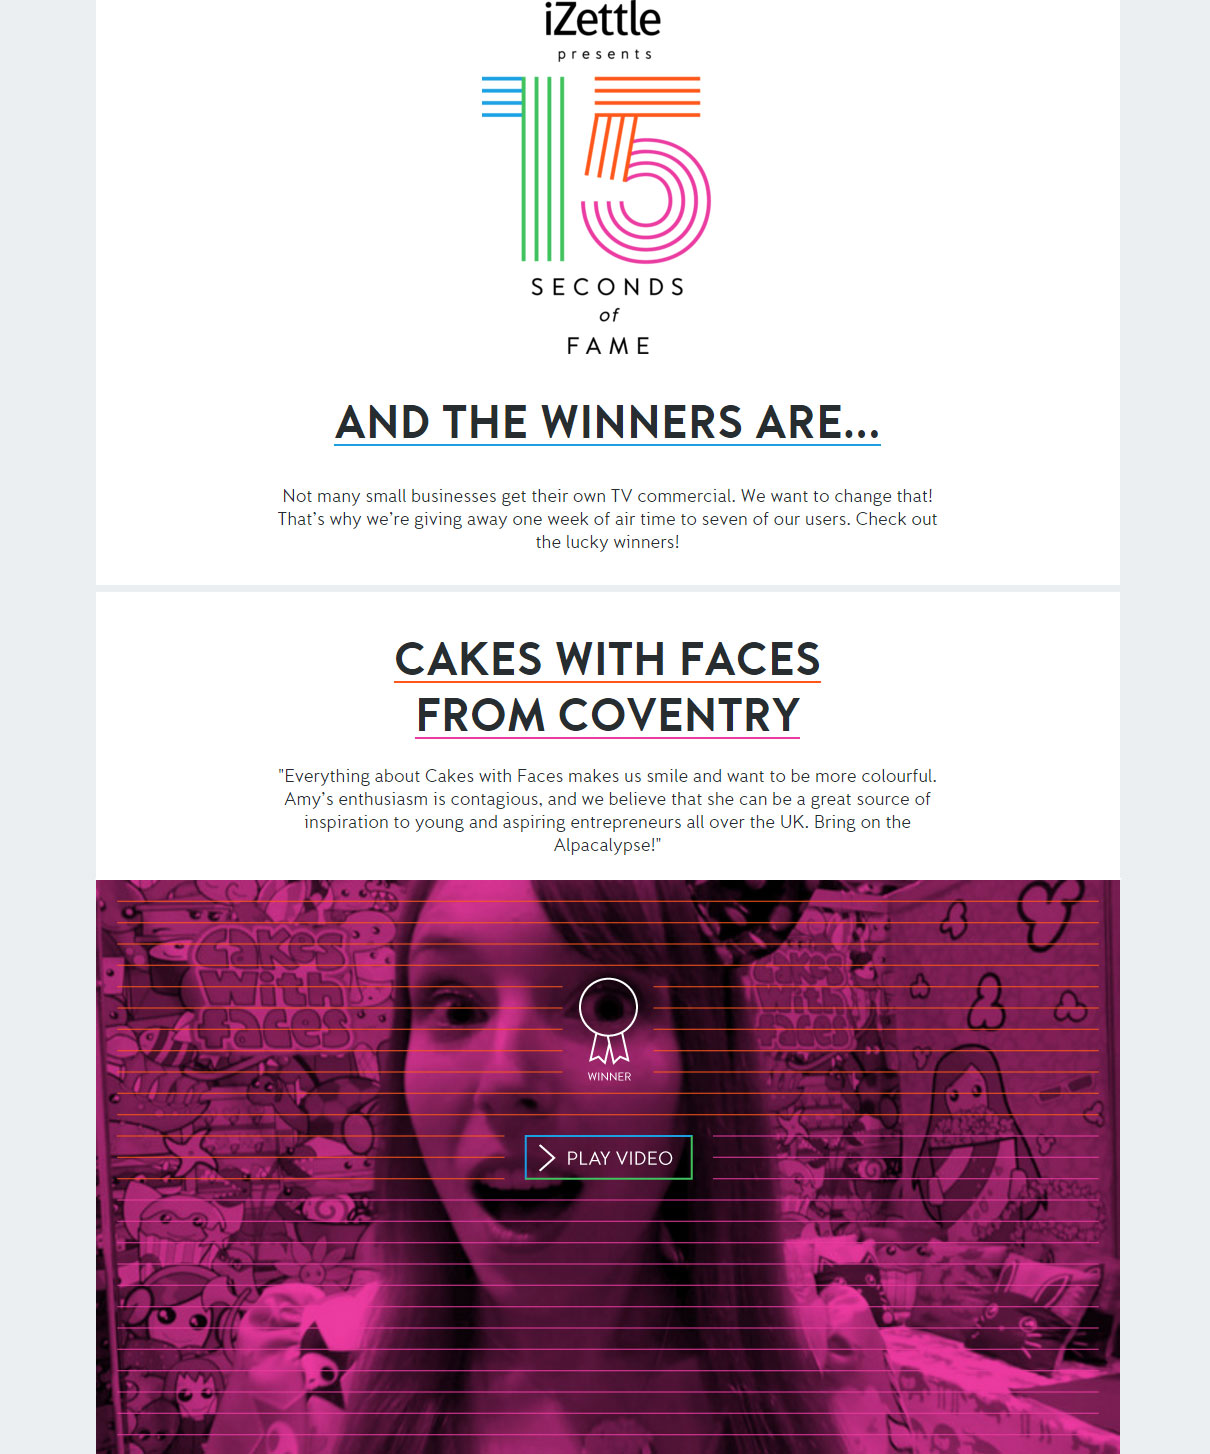 iZettle 15 Seconds of Fame winner - Cakes with Faces